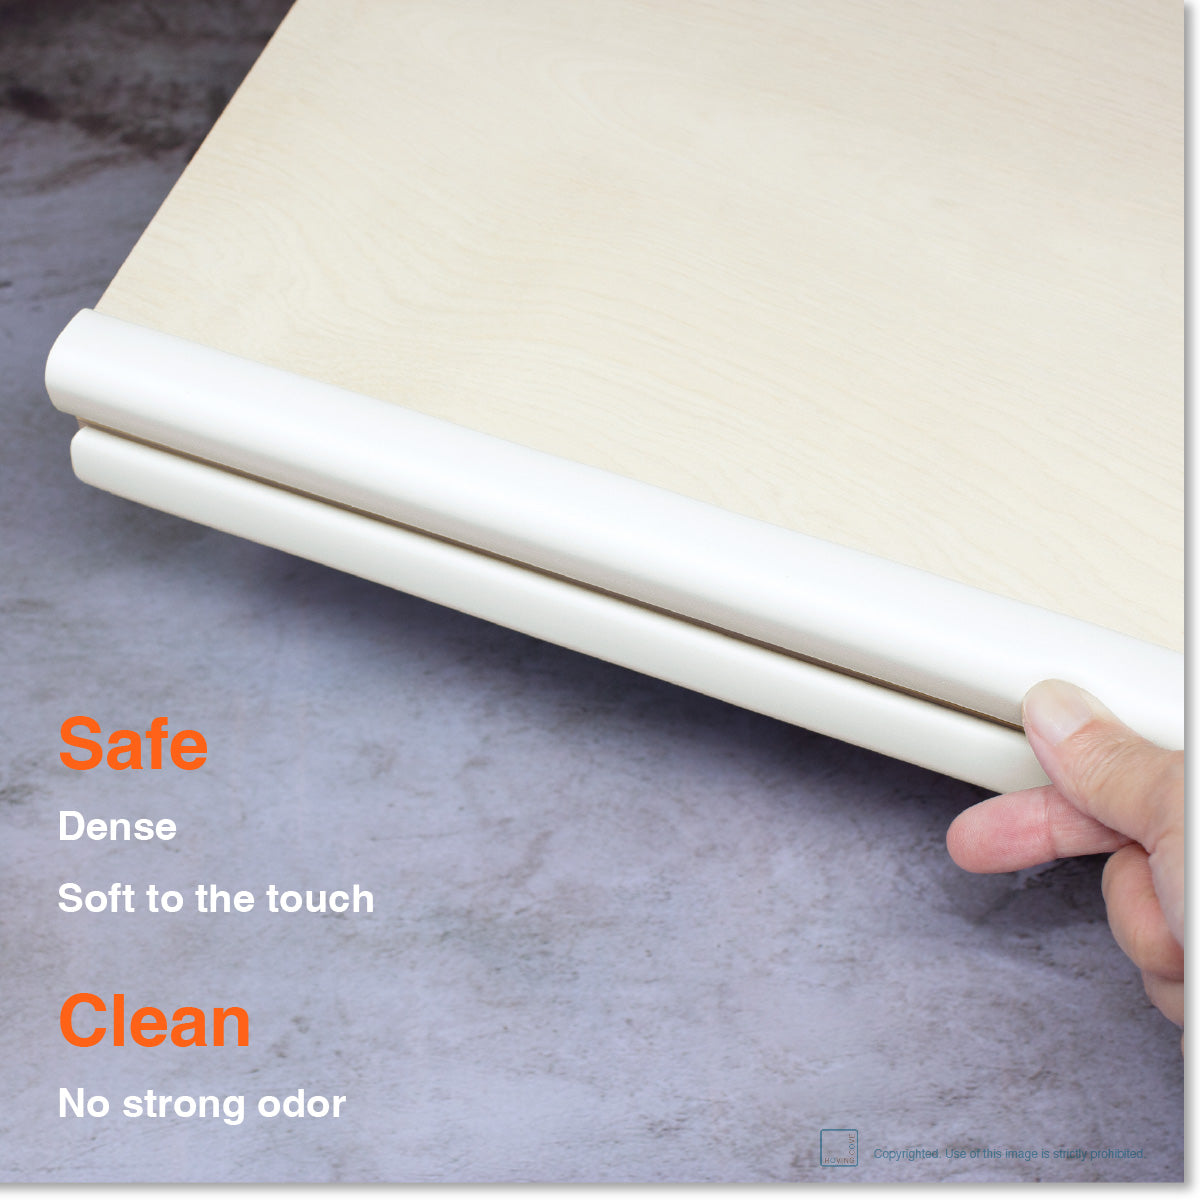 Roving Cove Edge and Corner Protector for Baby Proofing. Soft NBR Rubber Foam. Furniture and Fireplace Safety Corner Edge Bumper Guard, 3M Adhesive. Protect you and your loved ones from dangerous sharp edge and corners of fireplace, hearths, tables, desks, shelves, bed frames, and other furniture in your home.